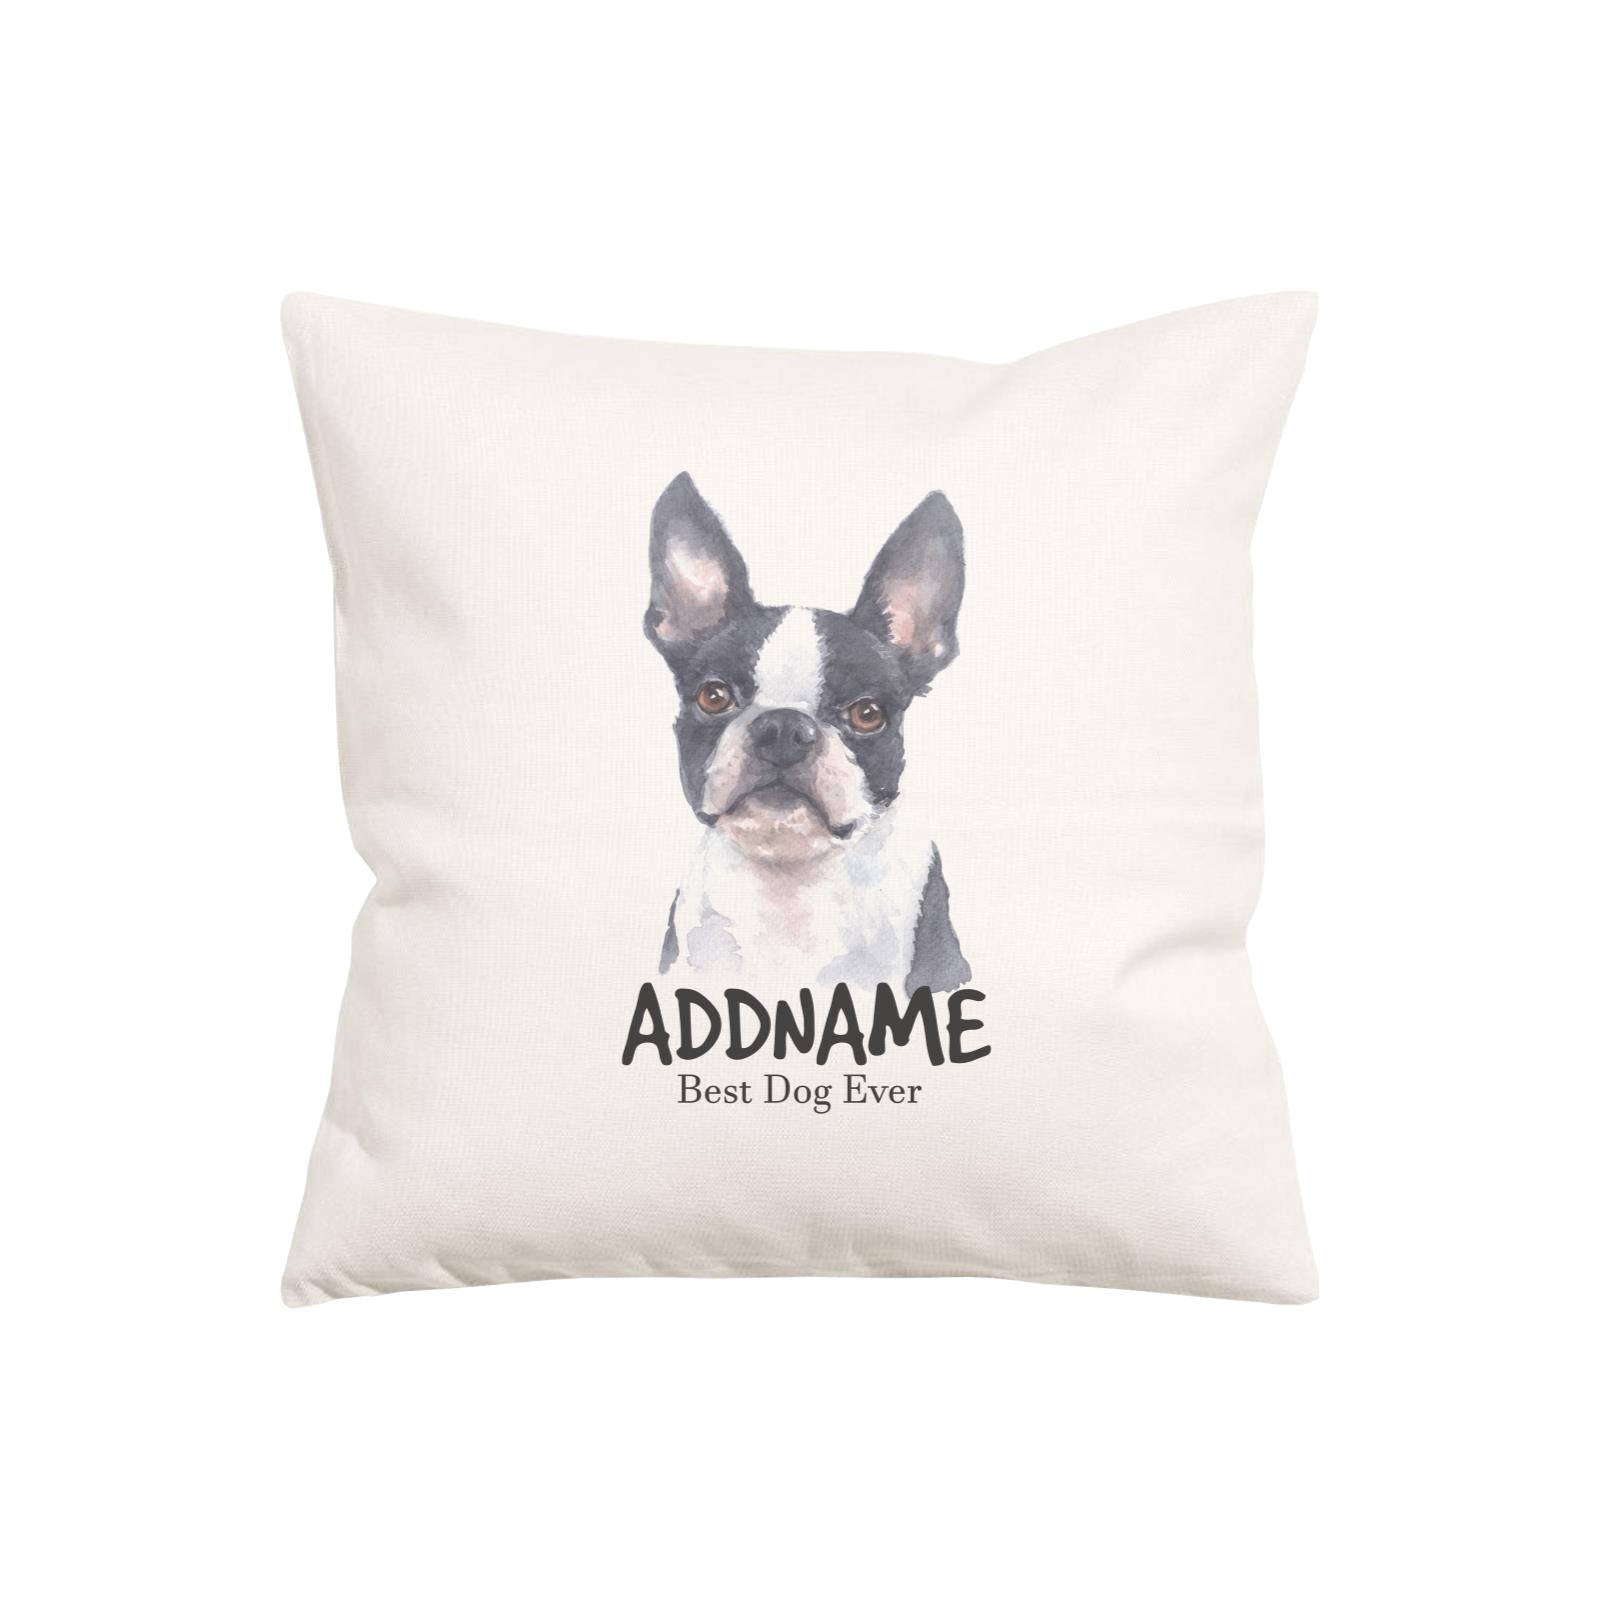 Watercolor Dog Series Boston Terrier Front Best Dog Ever Addname Pillow Cushion